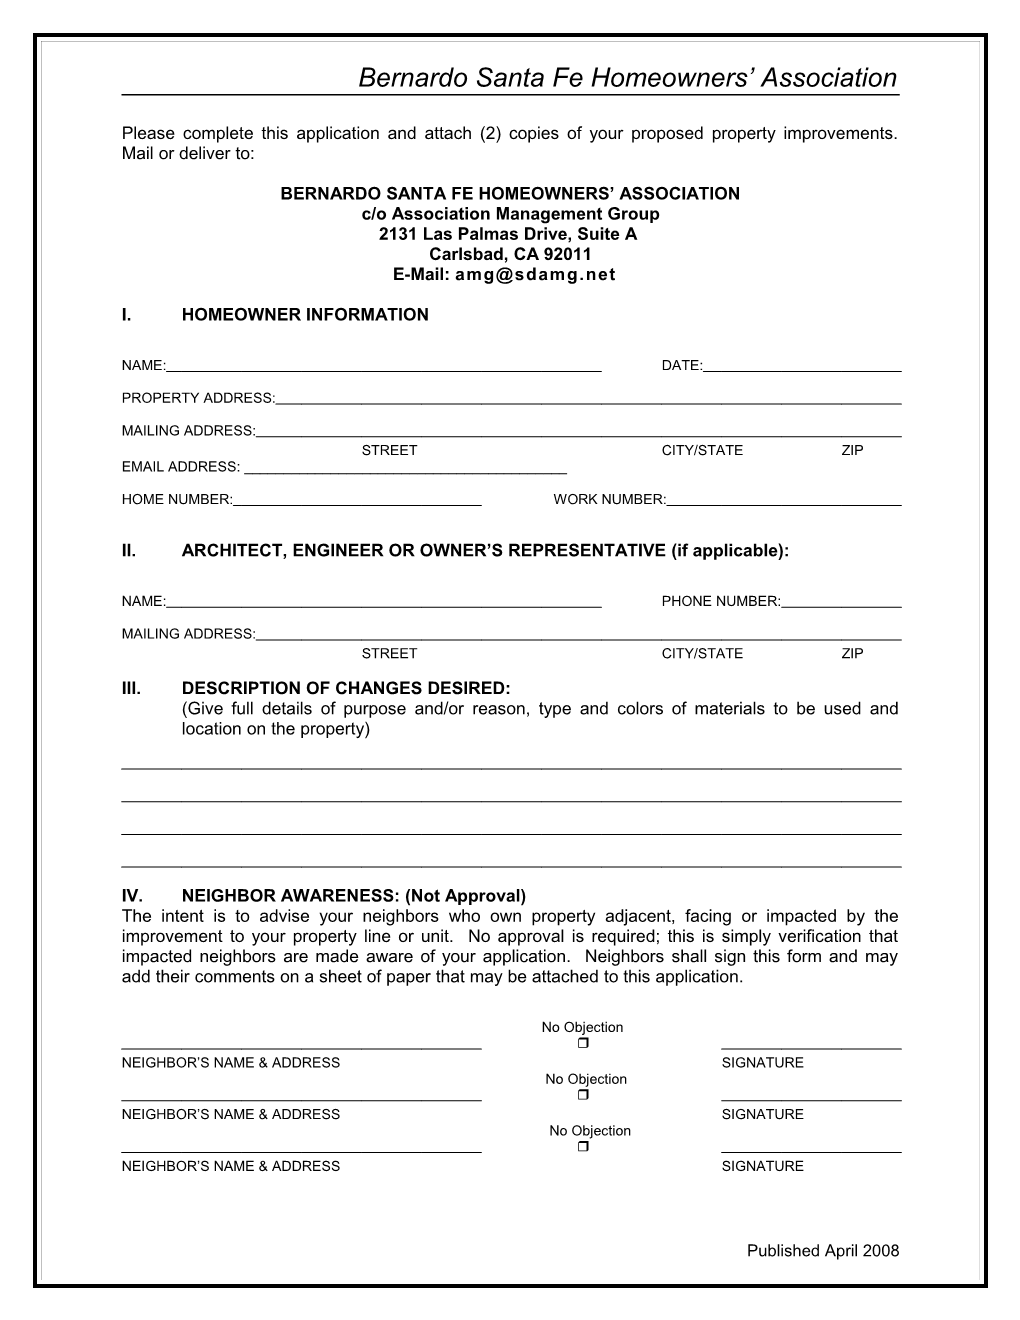 Please Complete This Application and Attach (2) Copies of Your Proposed Property Improvements